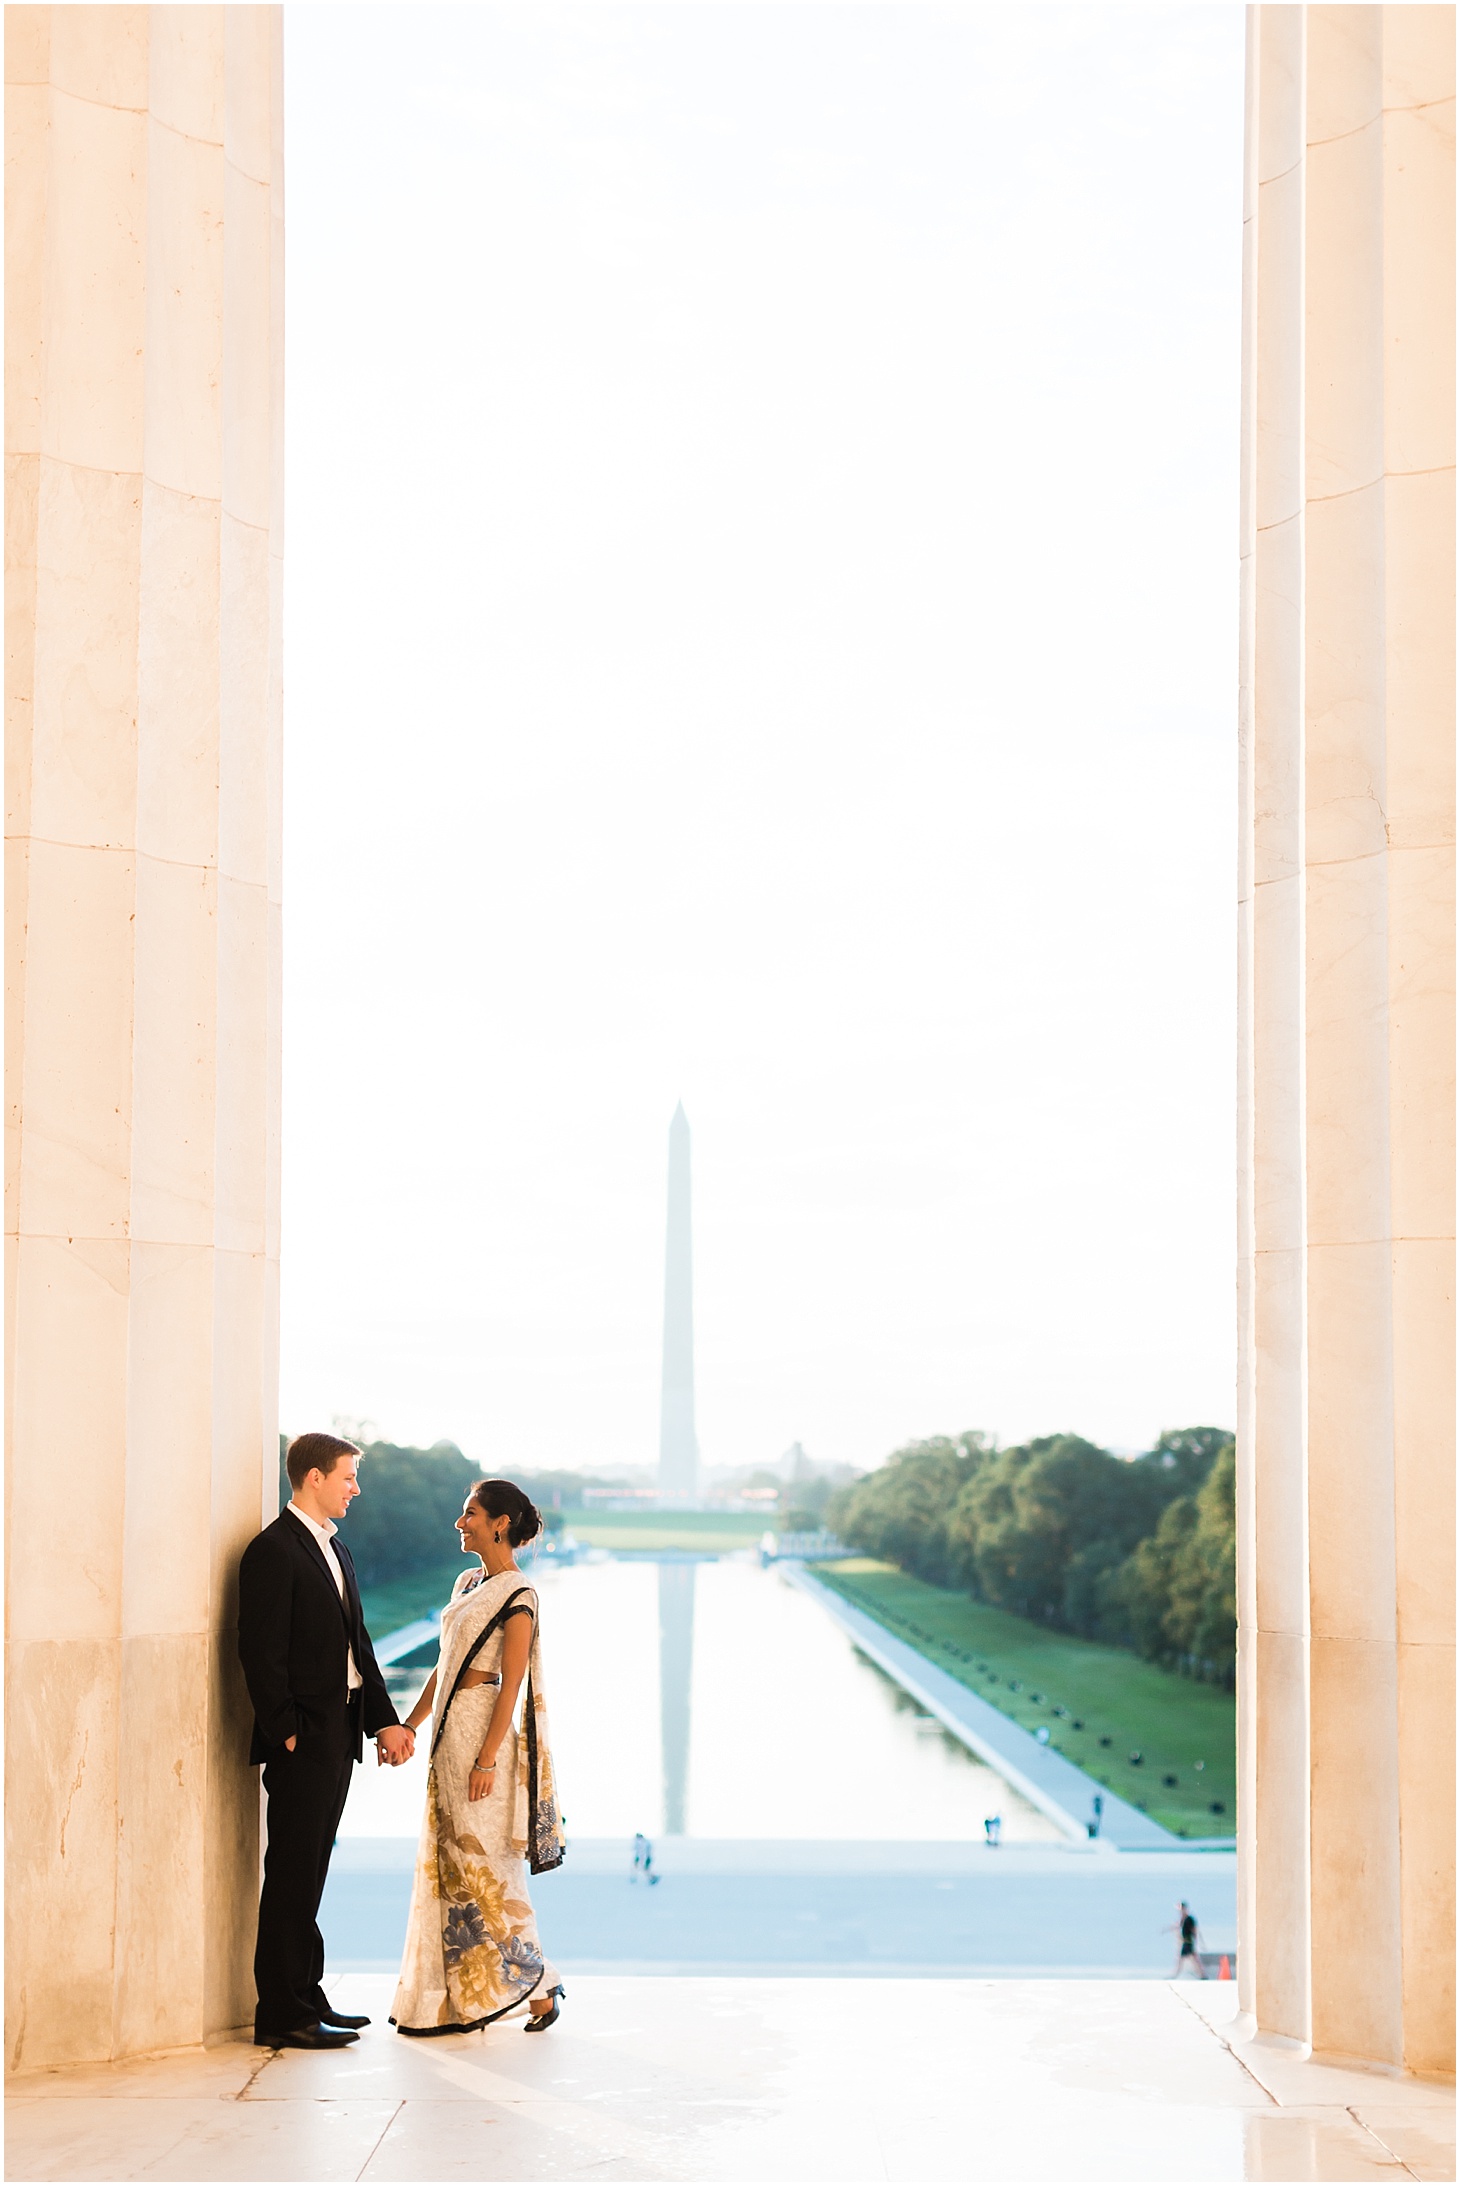 Engagement Portraits at the Lincoln Memorial in Washington, DC | Sunrise Engagement Session at the Lincoln Memorial Reflecting Pool | Sarah Bradshaw Photography